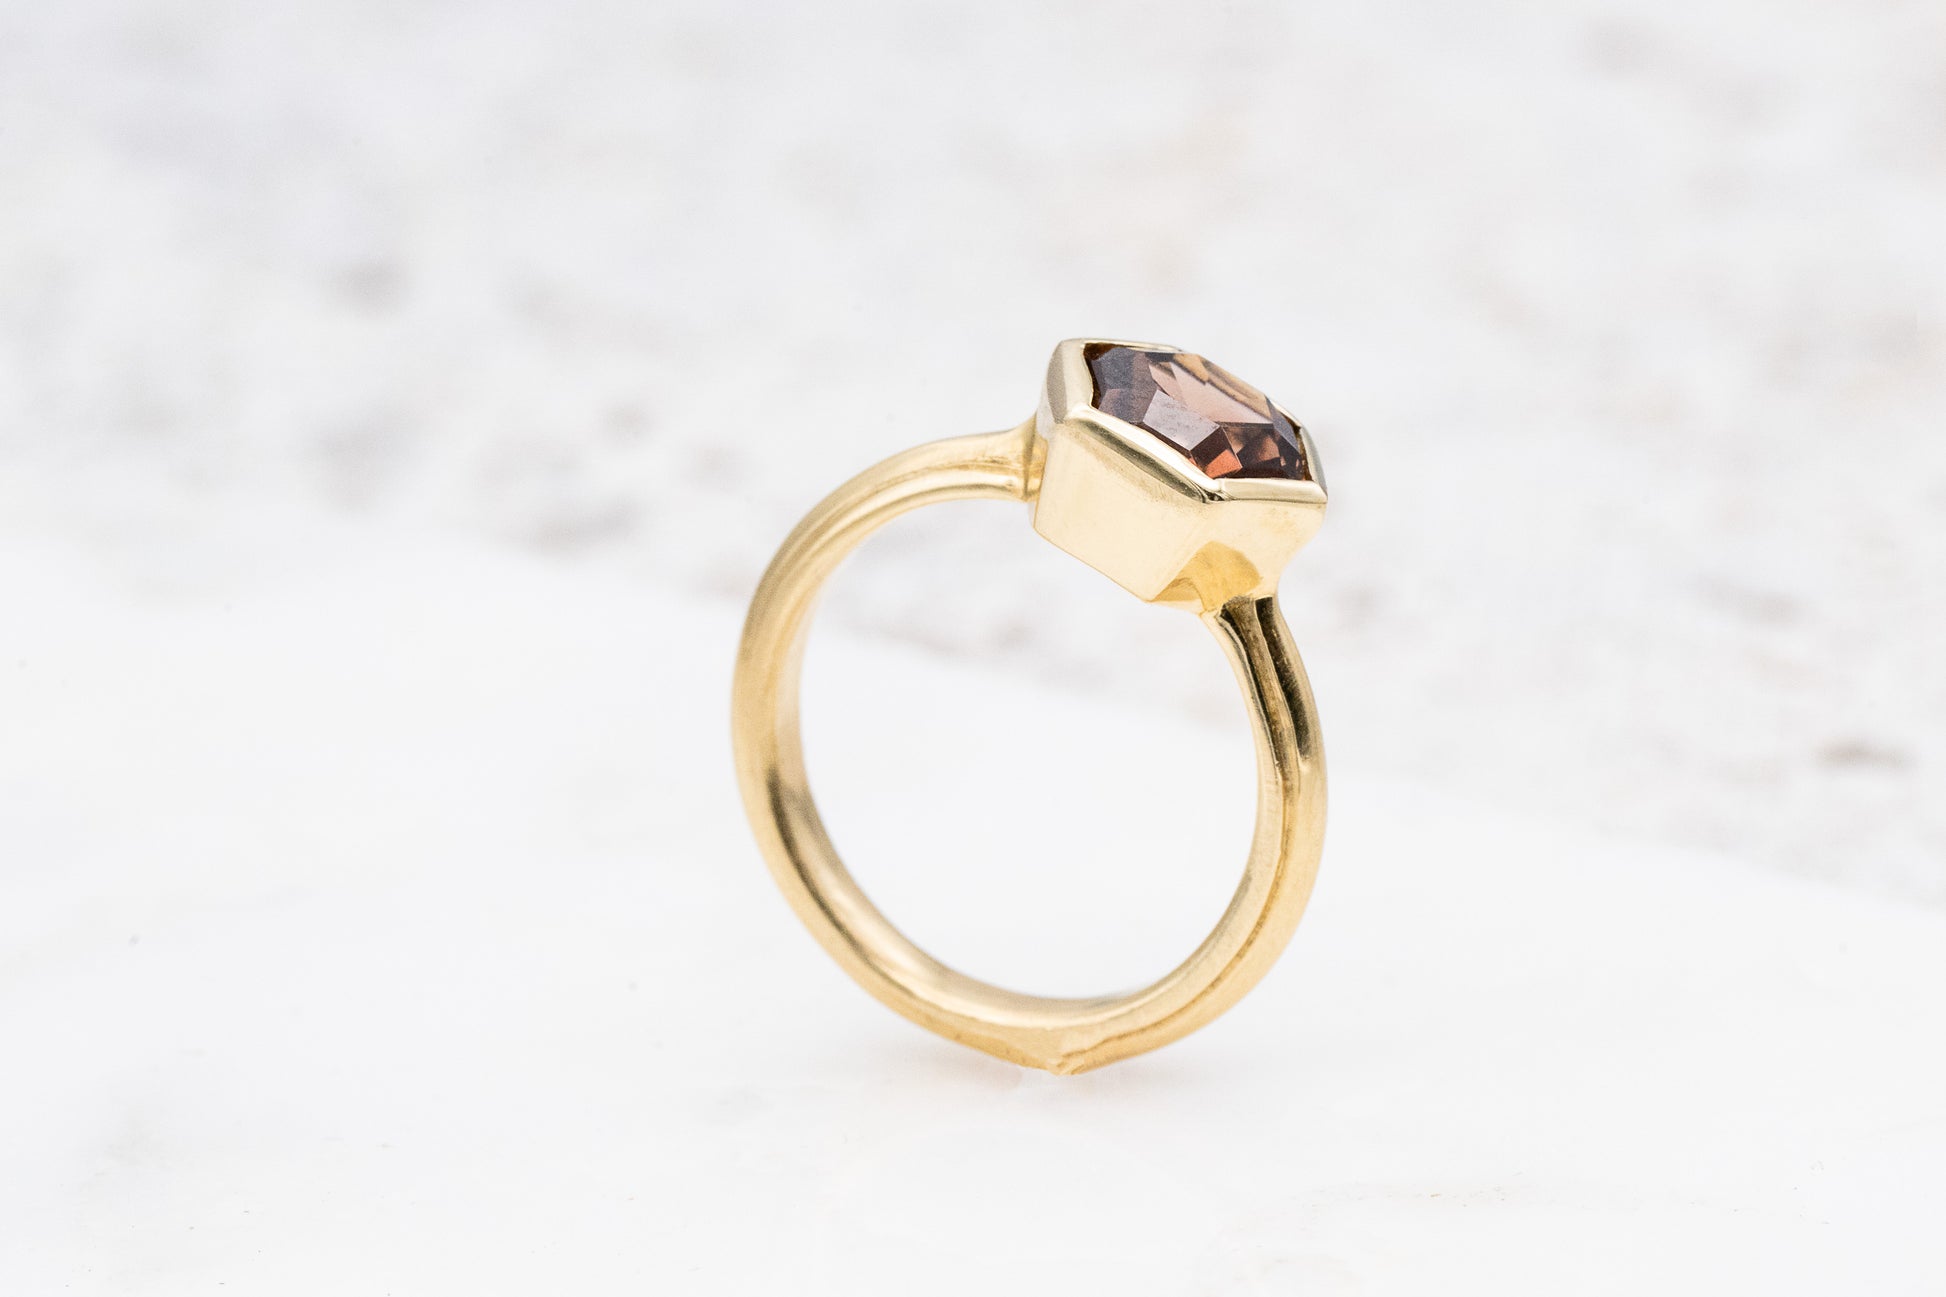 Cassin Jewelry offers a handmade Tawny Champagne Yellow Gold Hexagon ring with a brown stone.